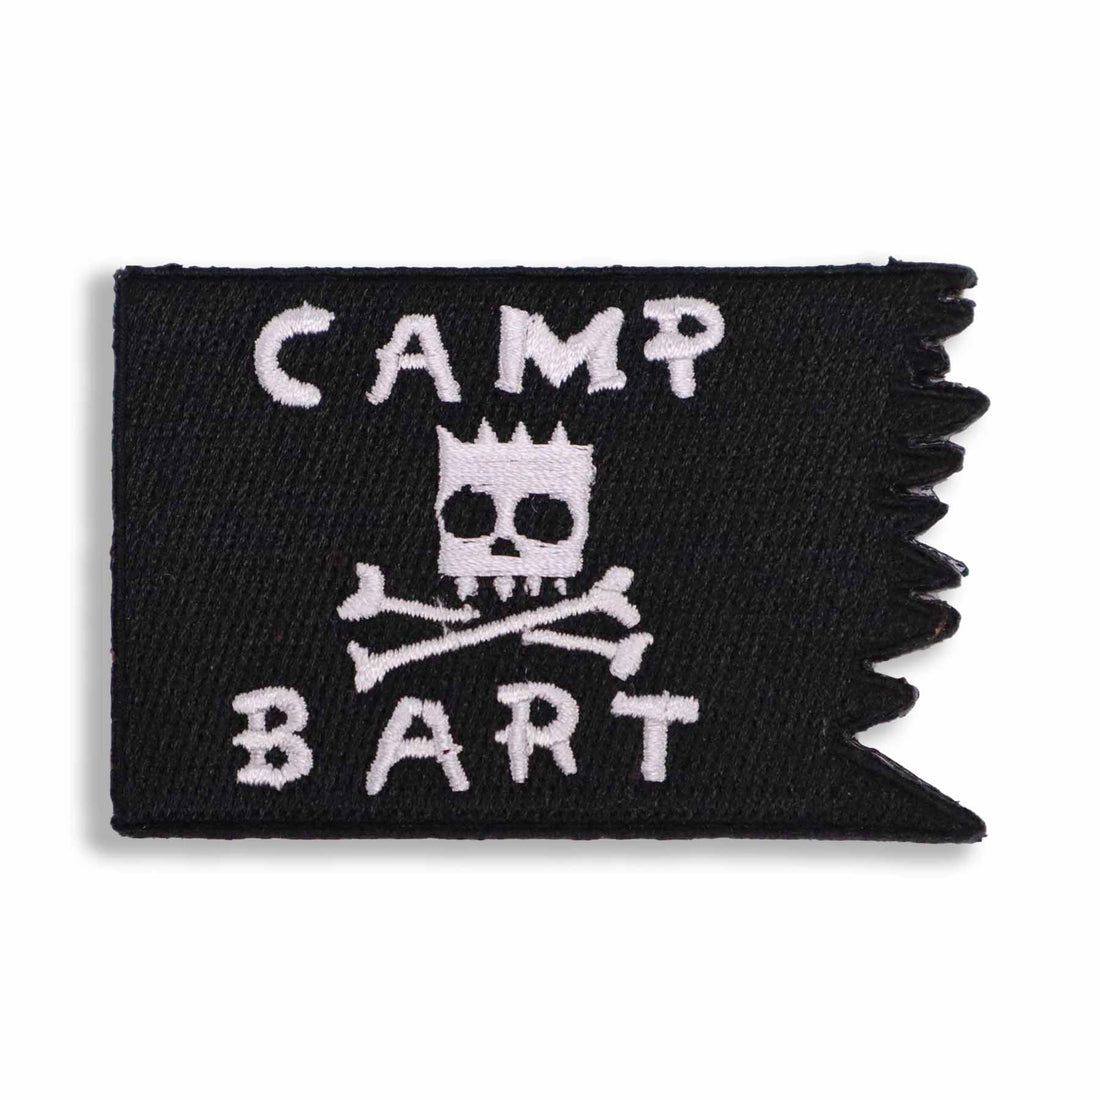 Supplies - Identification - Morale Patches - Tactical Outfitters Camp Bart Flag Morale Patch